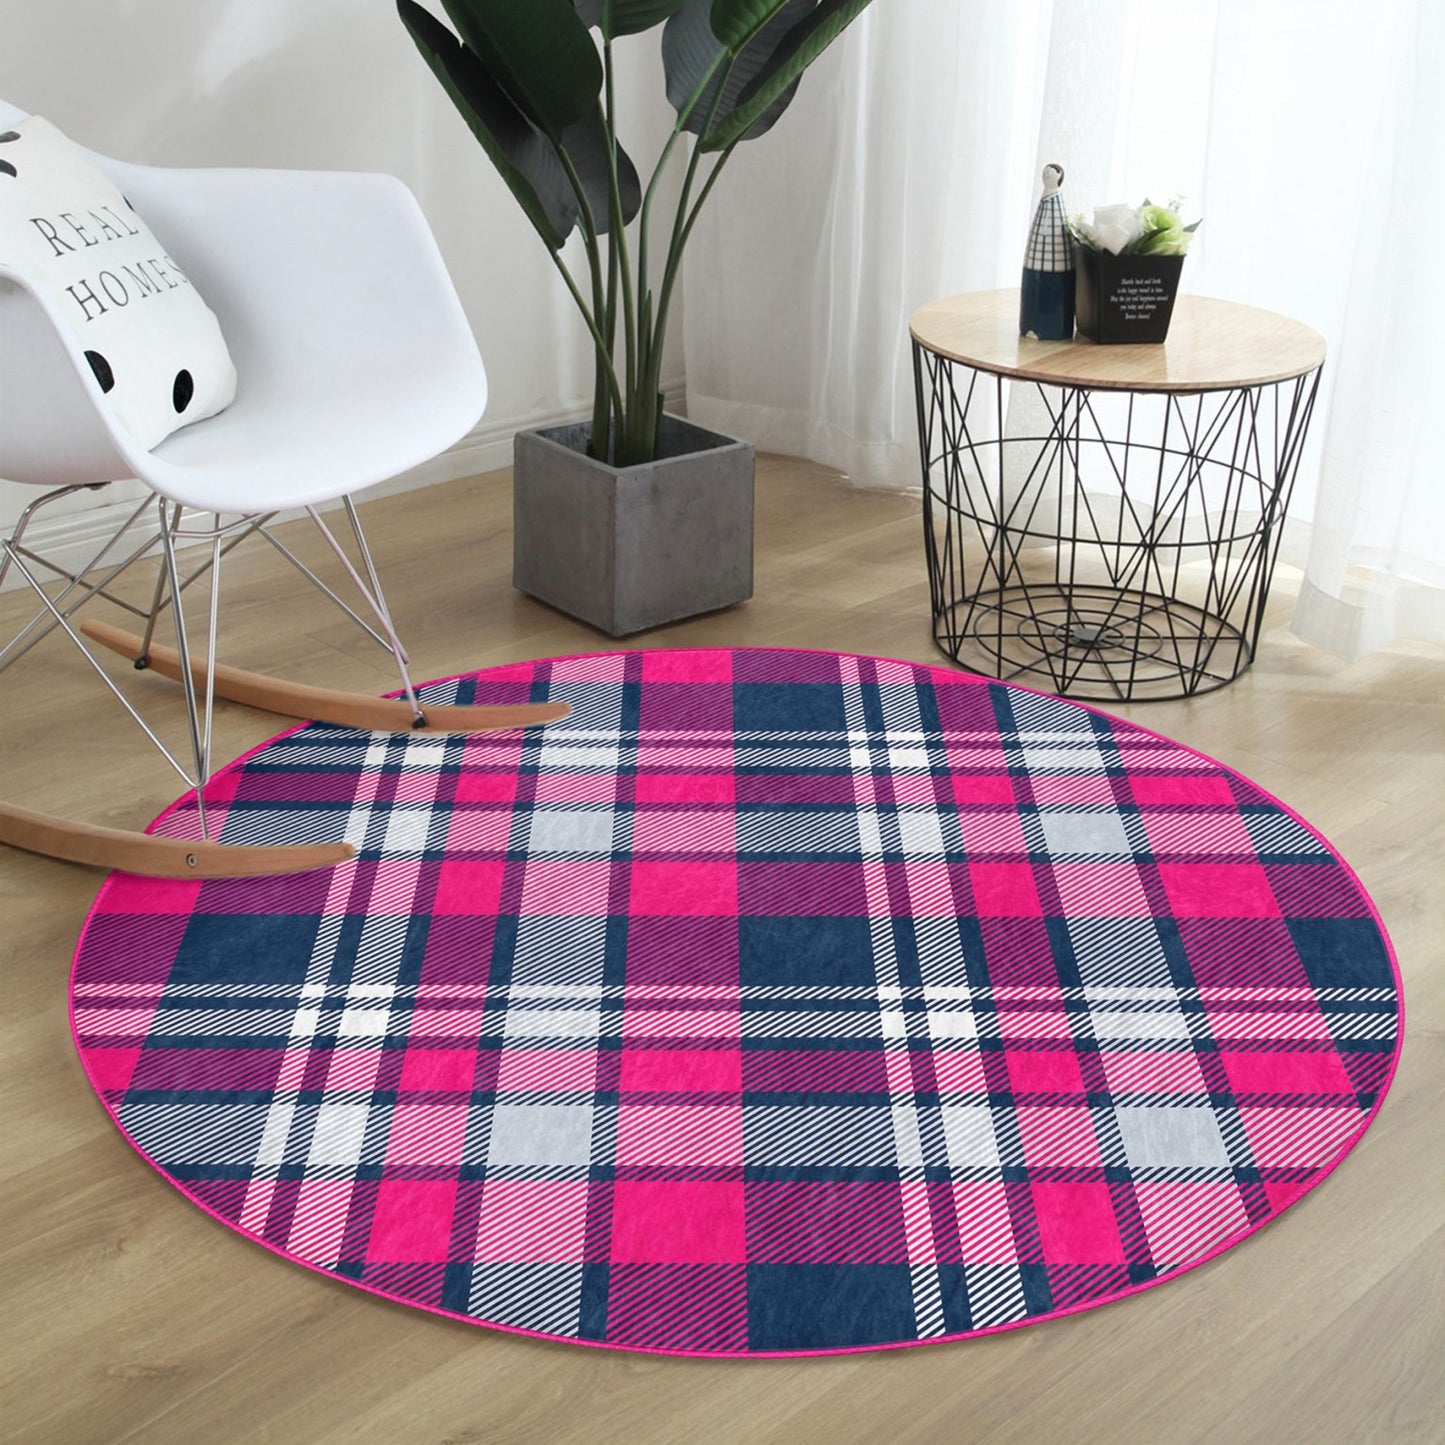 Round Patterned Floor Rug - Modern Accent